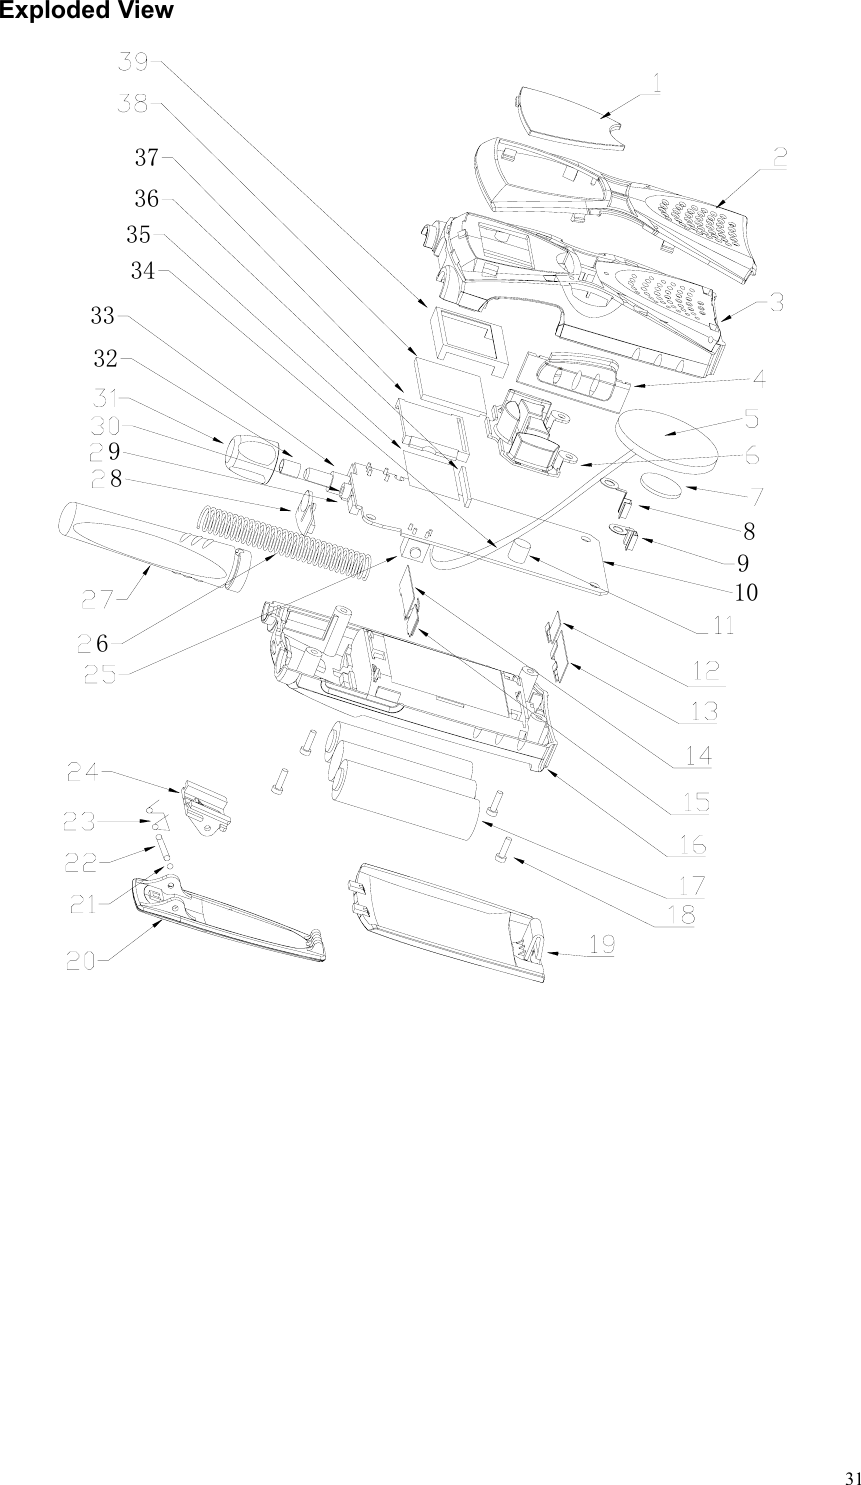   31Exploded View 6983233108934353637        